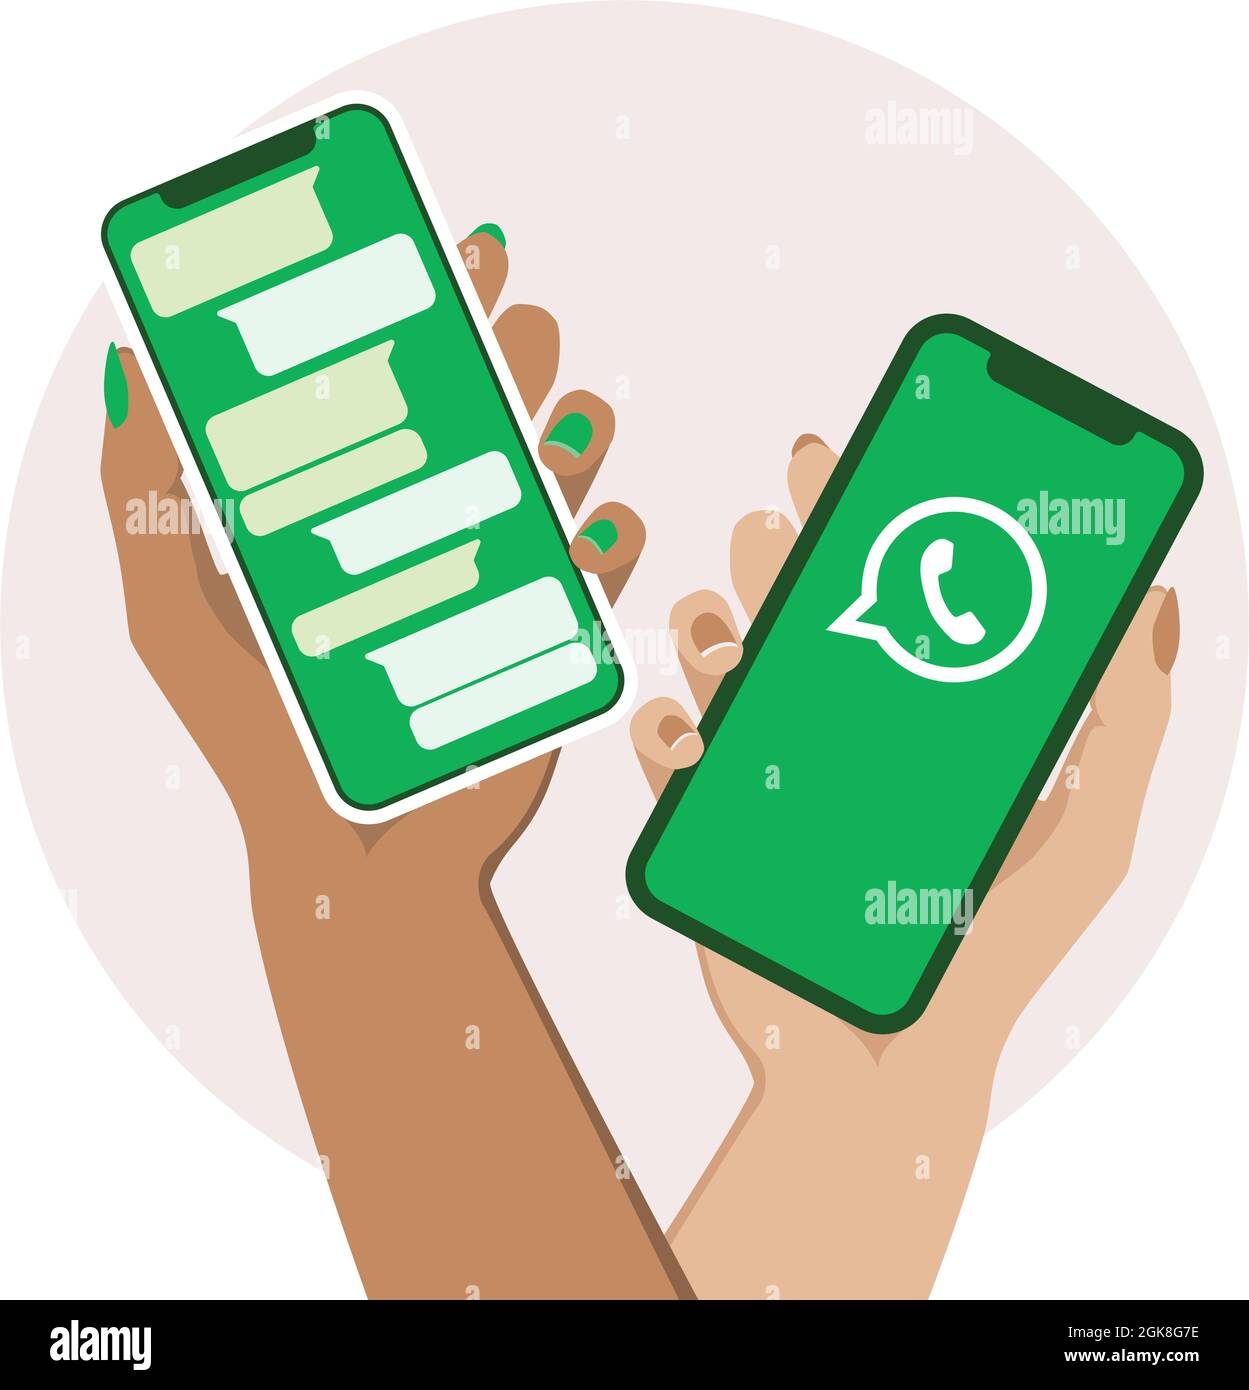 Two hands of woman holding smartphones with Whatsapp chat screen. Vector illustration. Flat colors. Stock Vector